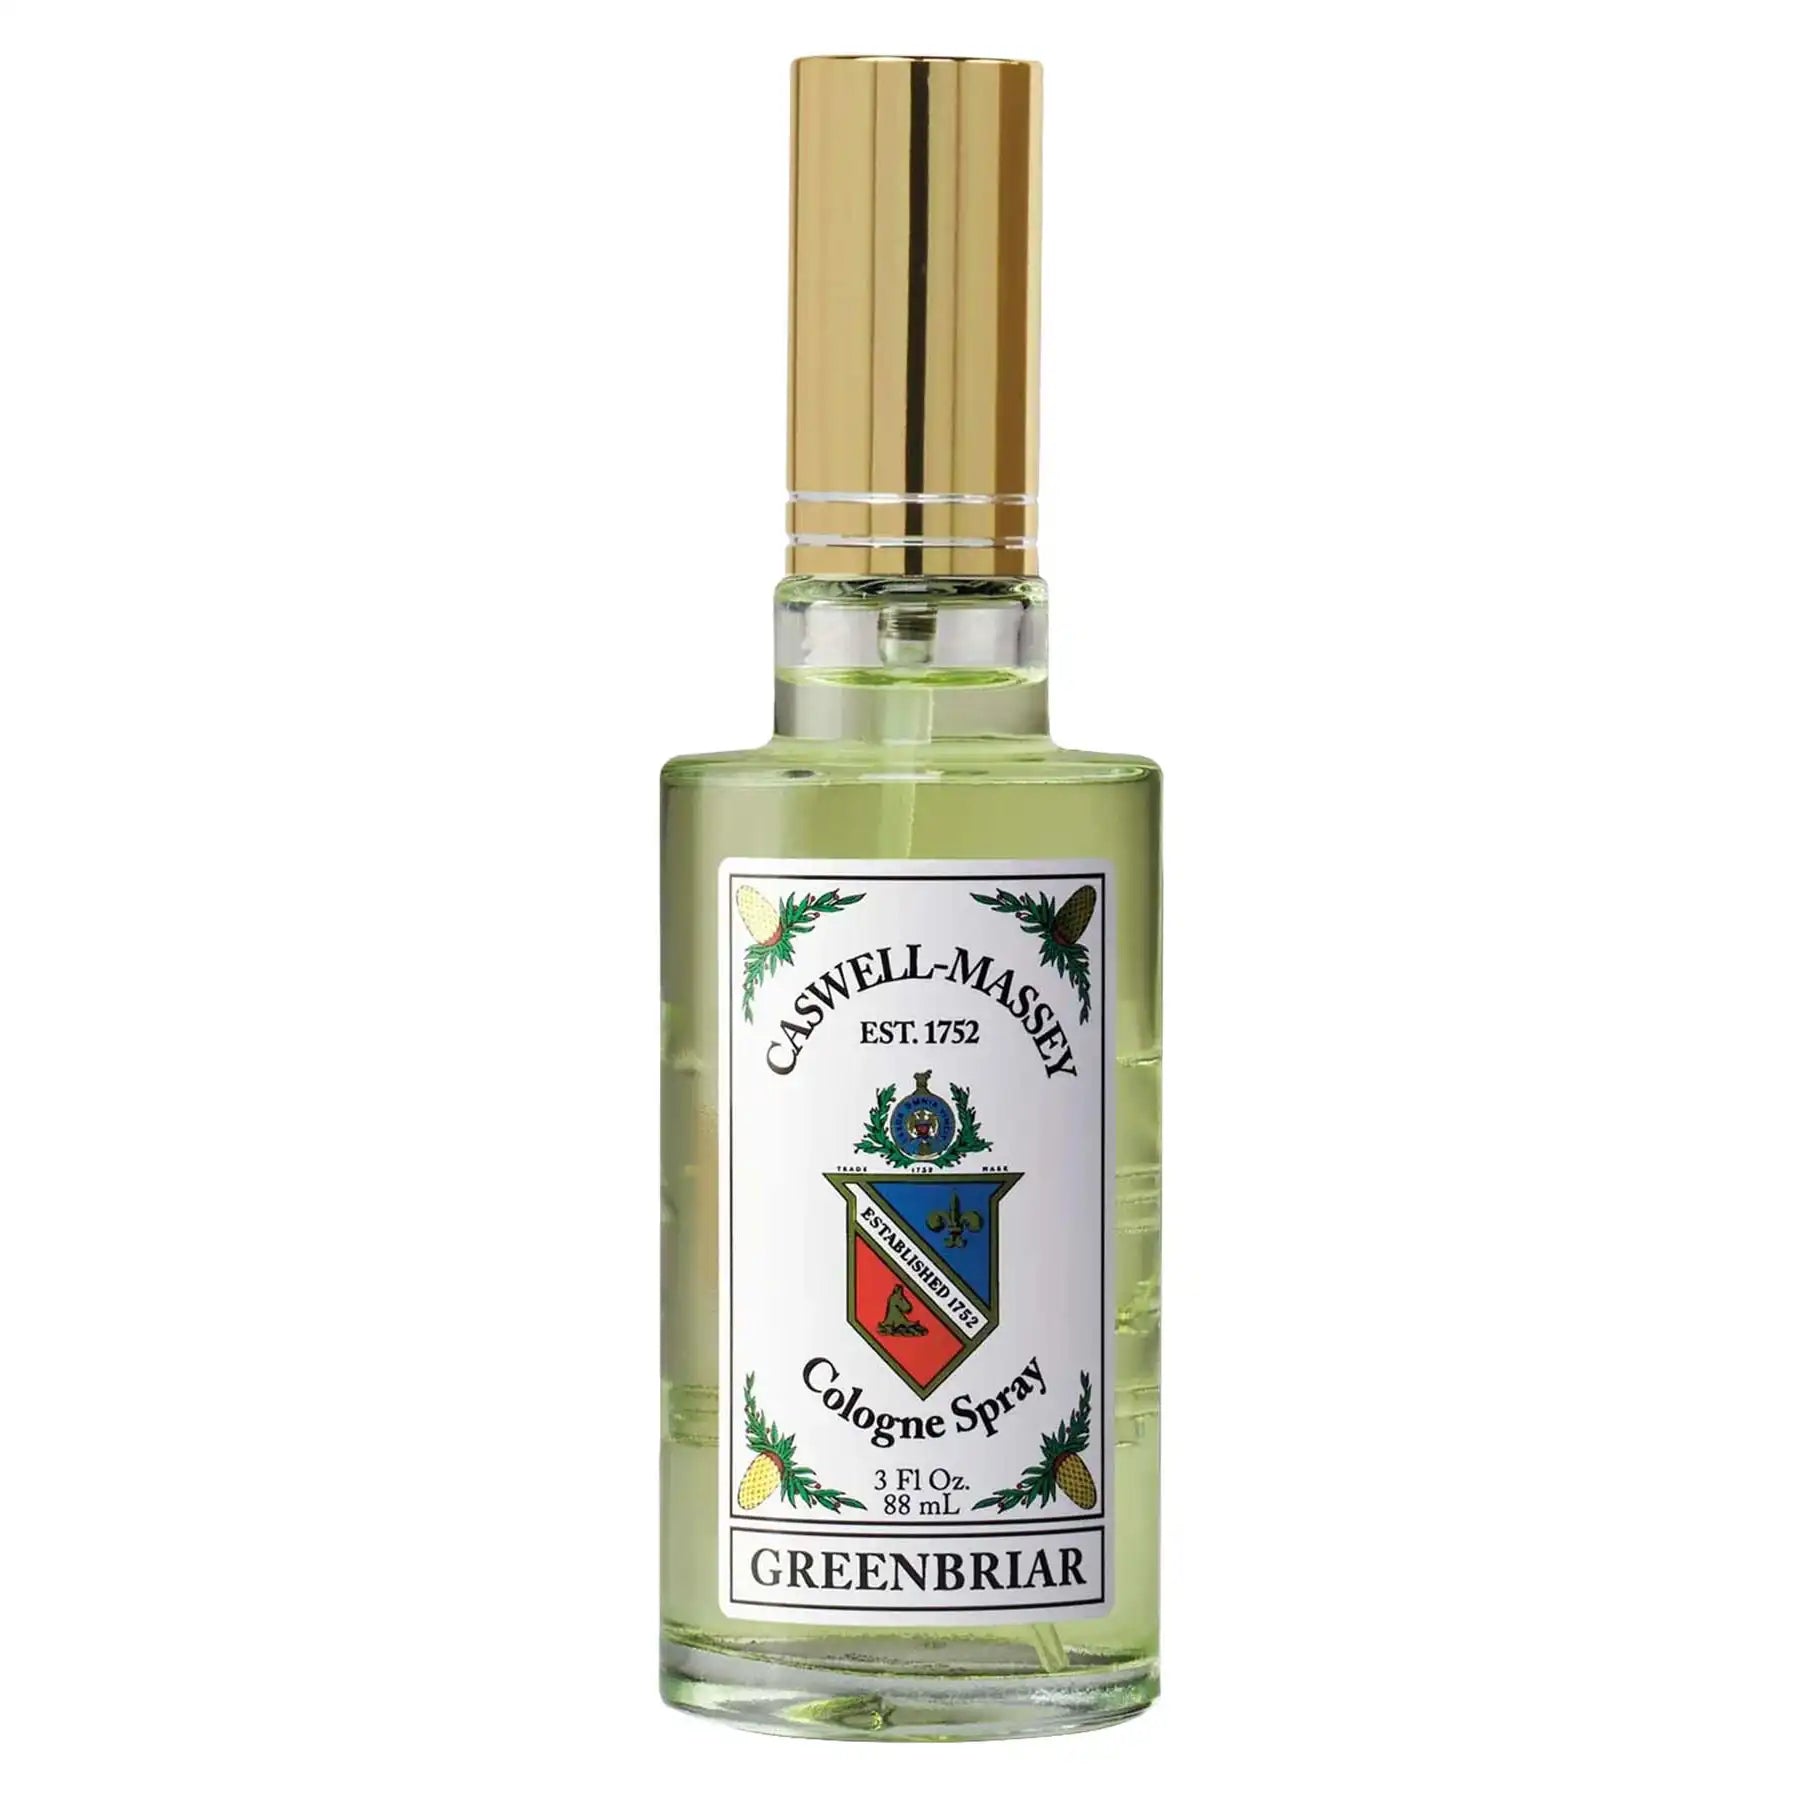 Caswell Massey Greenbriar Cologne 88ml